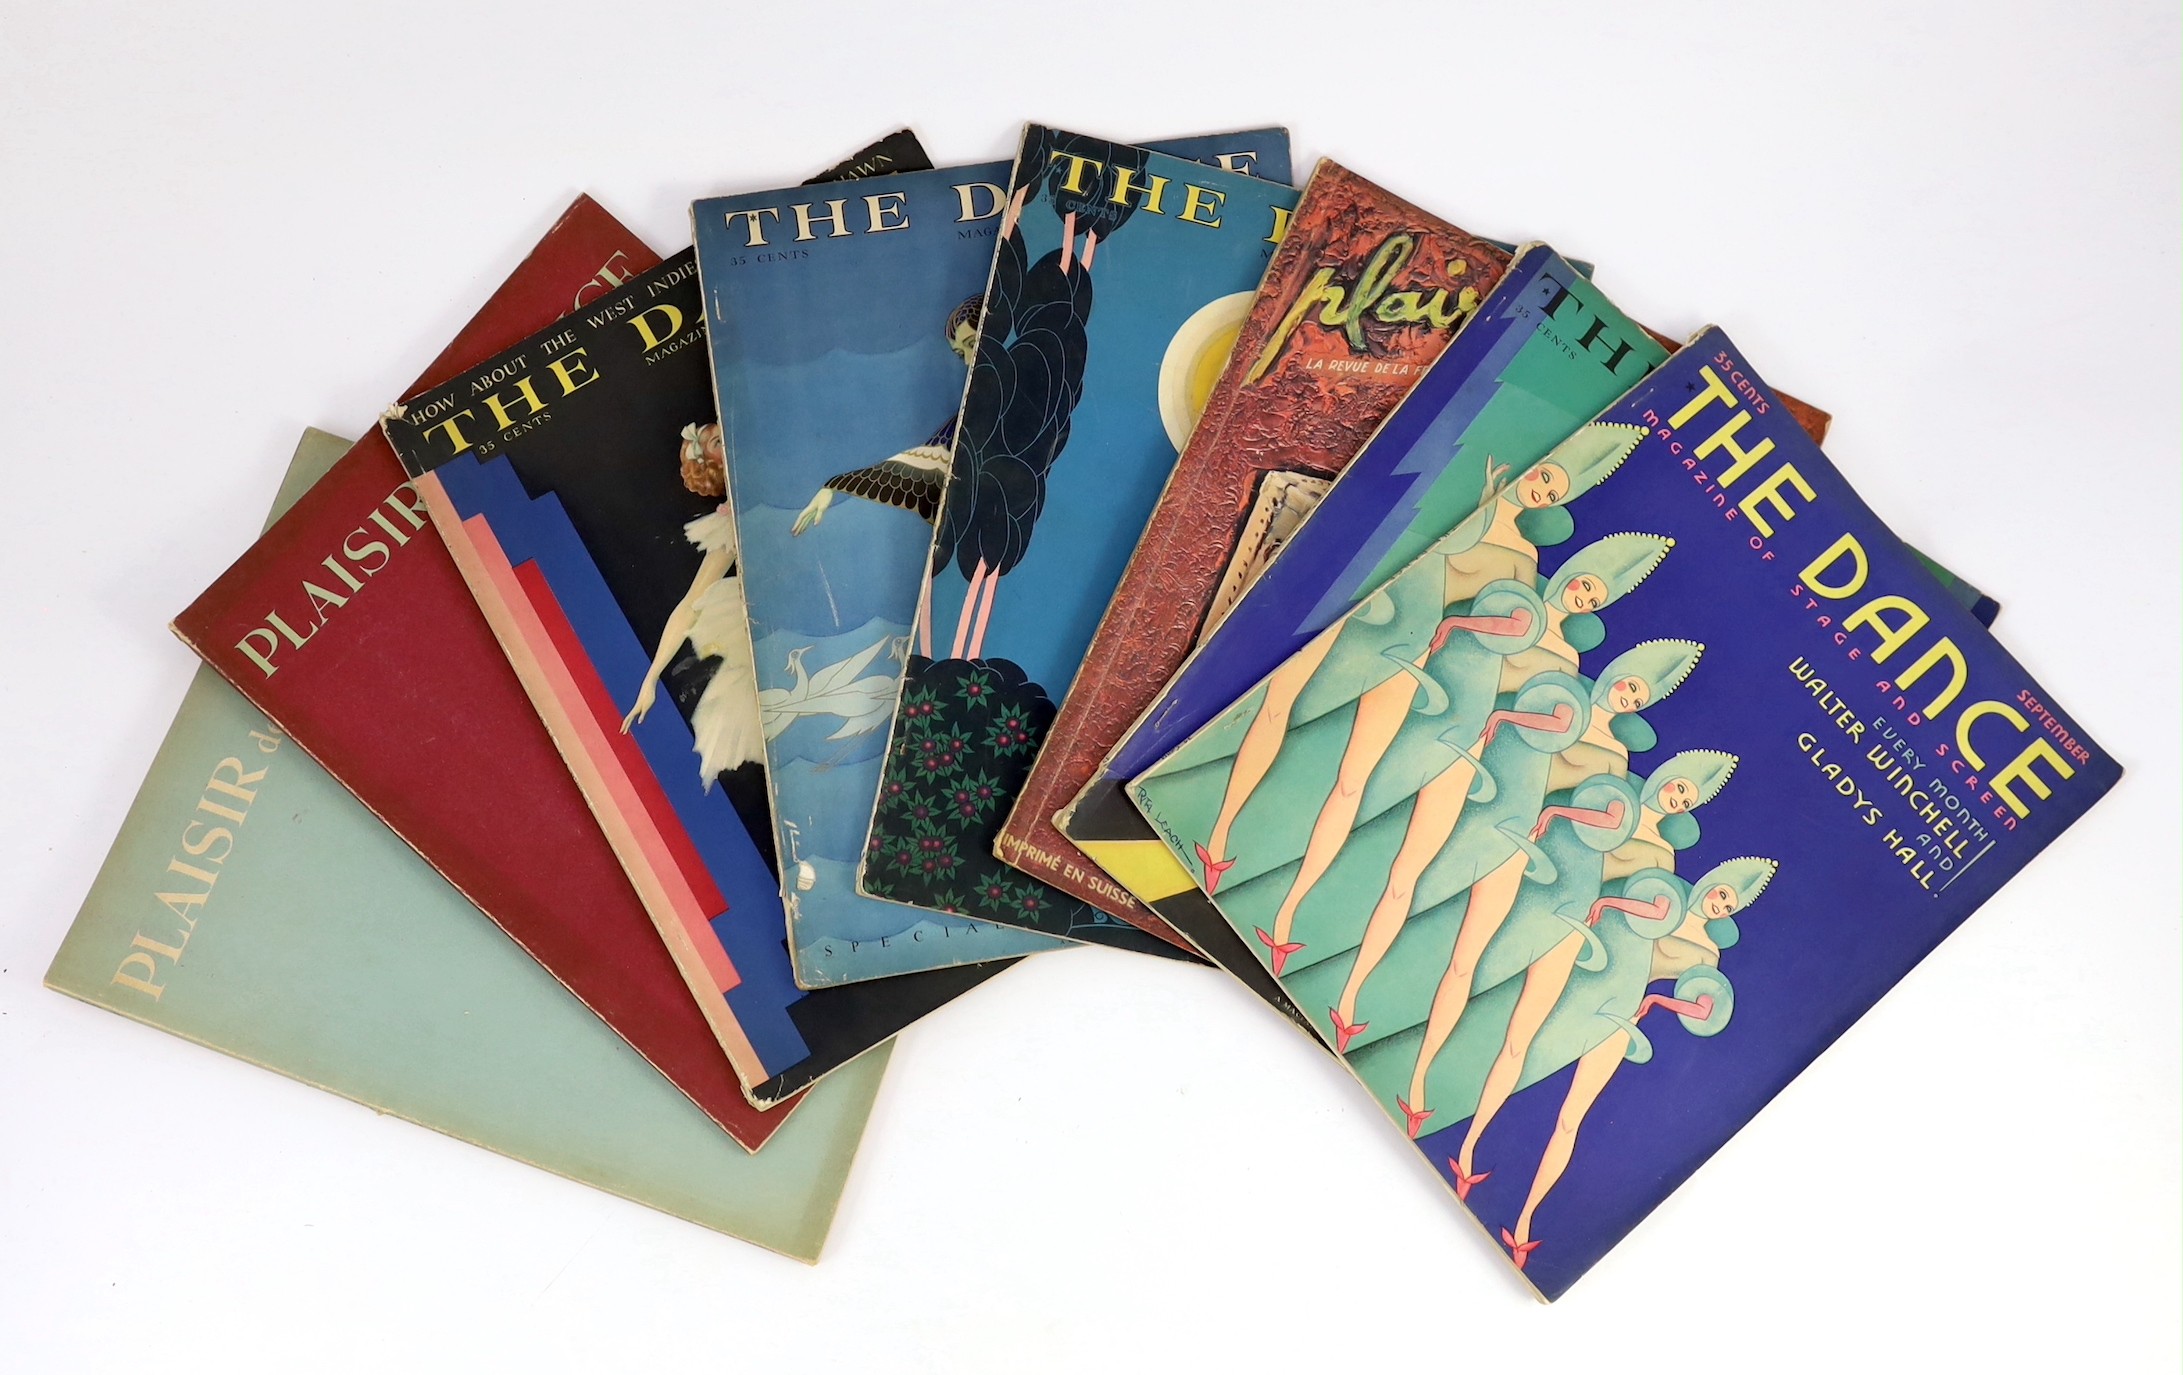 Plaisir de France Magazine - 2 issues, January/February & March, 1947; The Dance Magazine - 5 issues, August-November, 1929 & September, 1930, together with the Plaire magazine, number 6, 1946, (8)                       